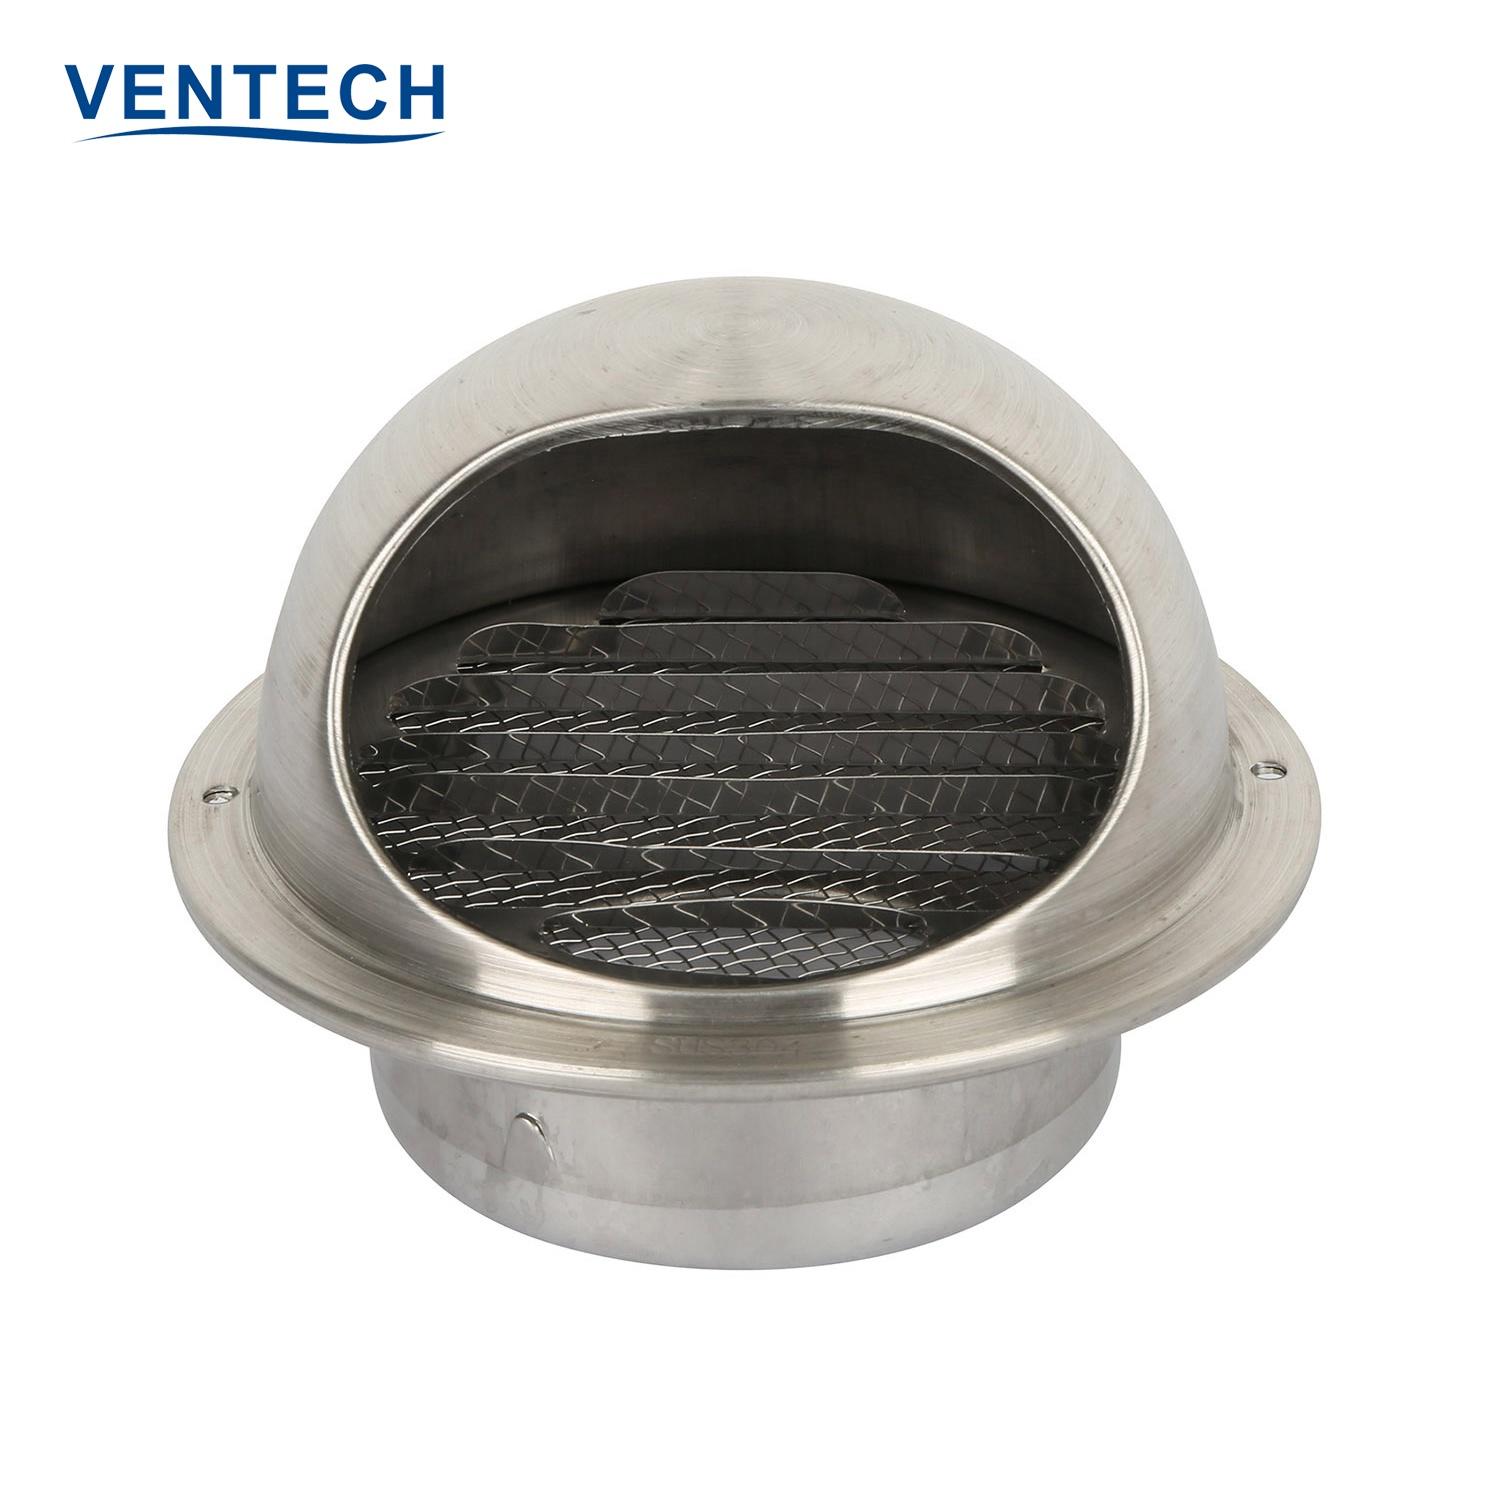 Hvac System Rafter Waterproof Stainless Steel Vent Cowl For Ventilation